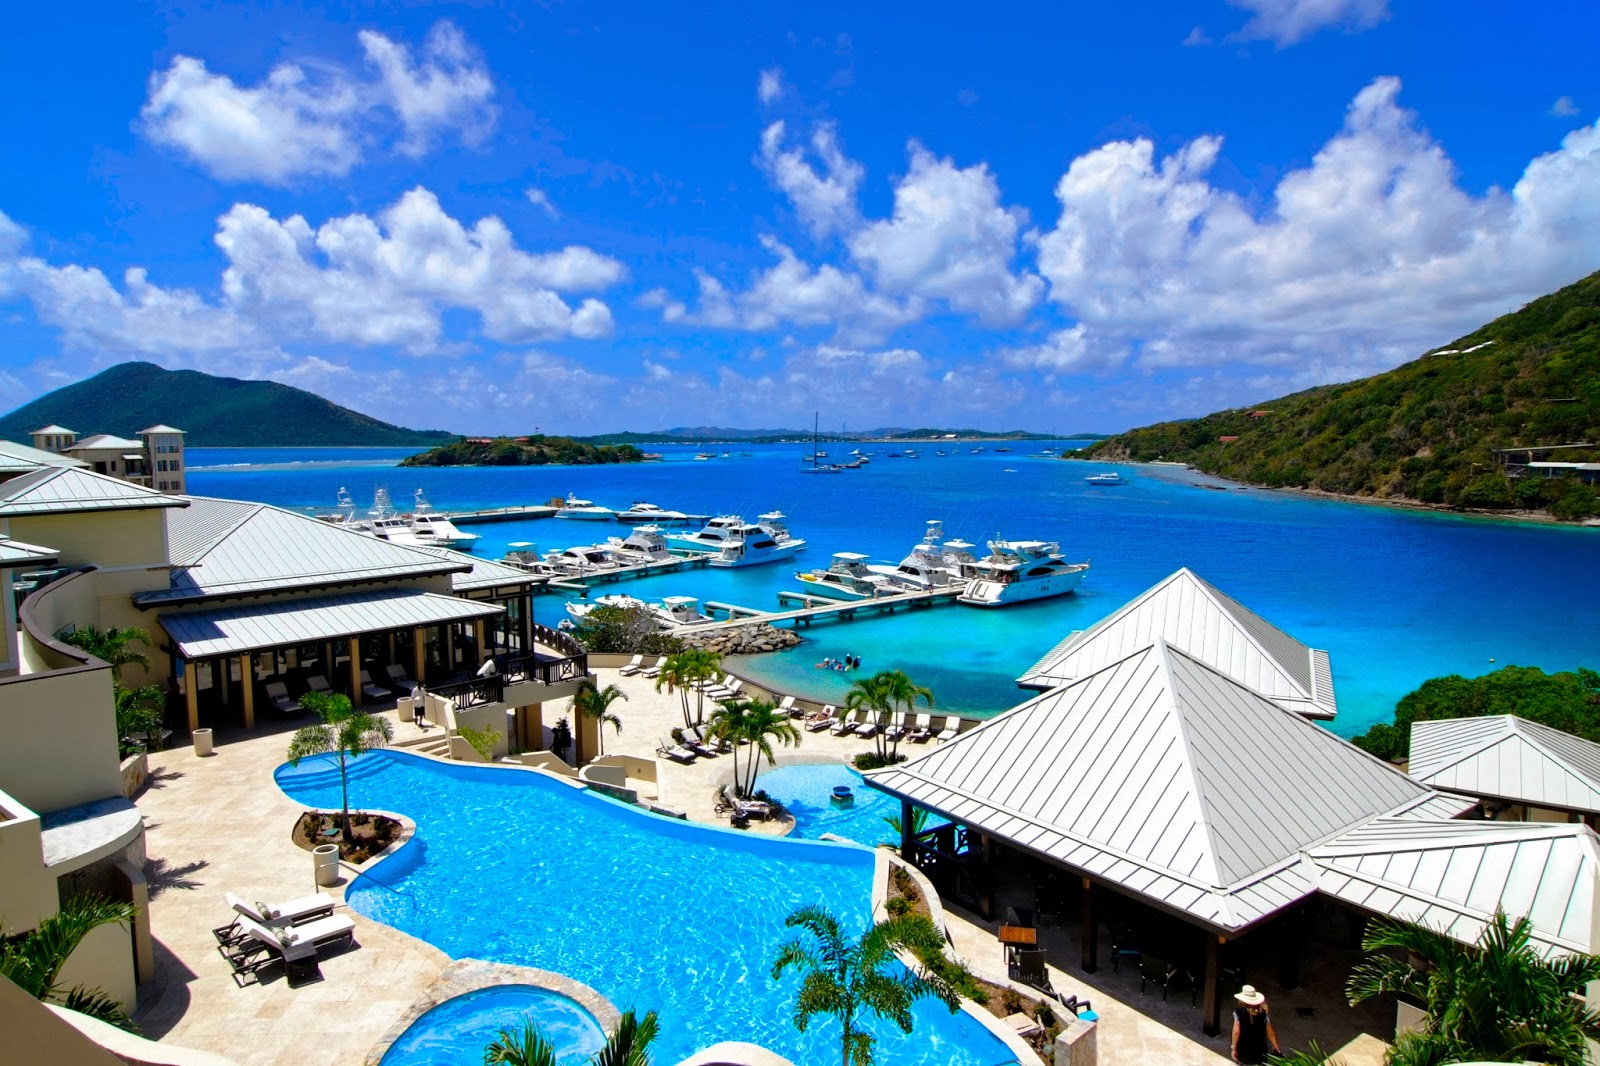 Virgin Islands Are The Caribbean S Best Destination For Private Island